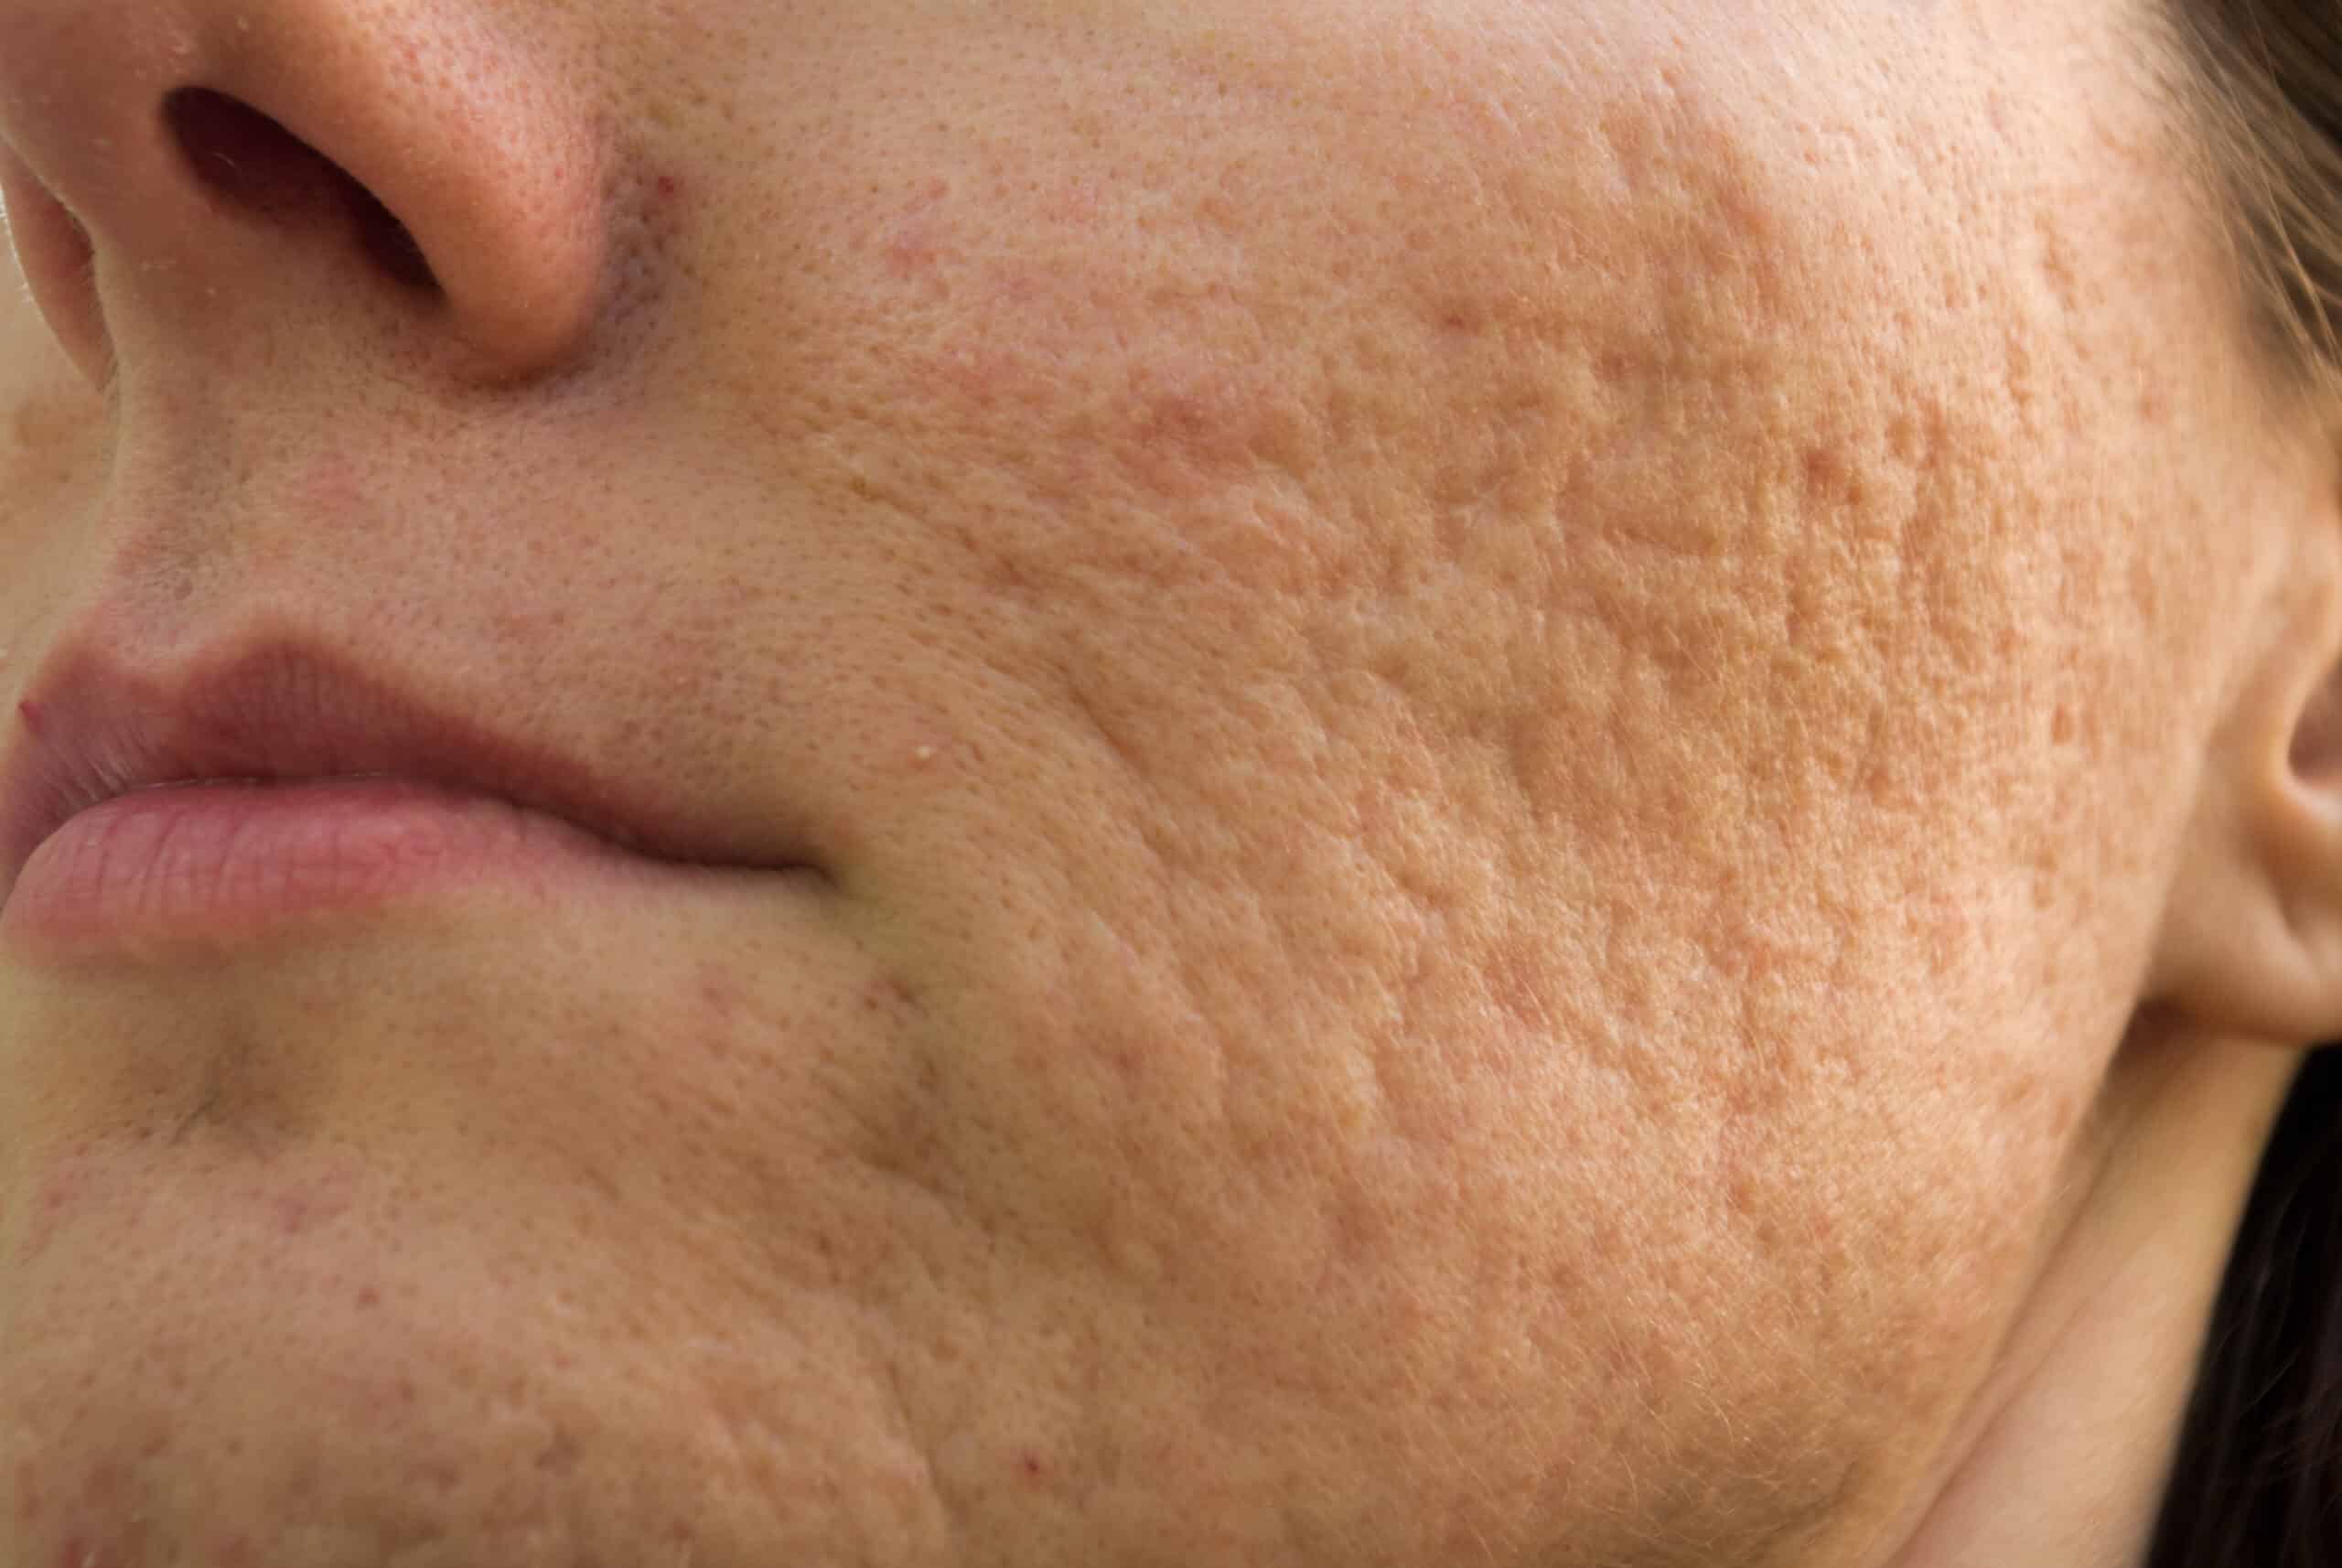 Laser Treatments for Acne Scars - Is it Bad